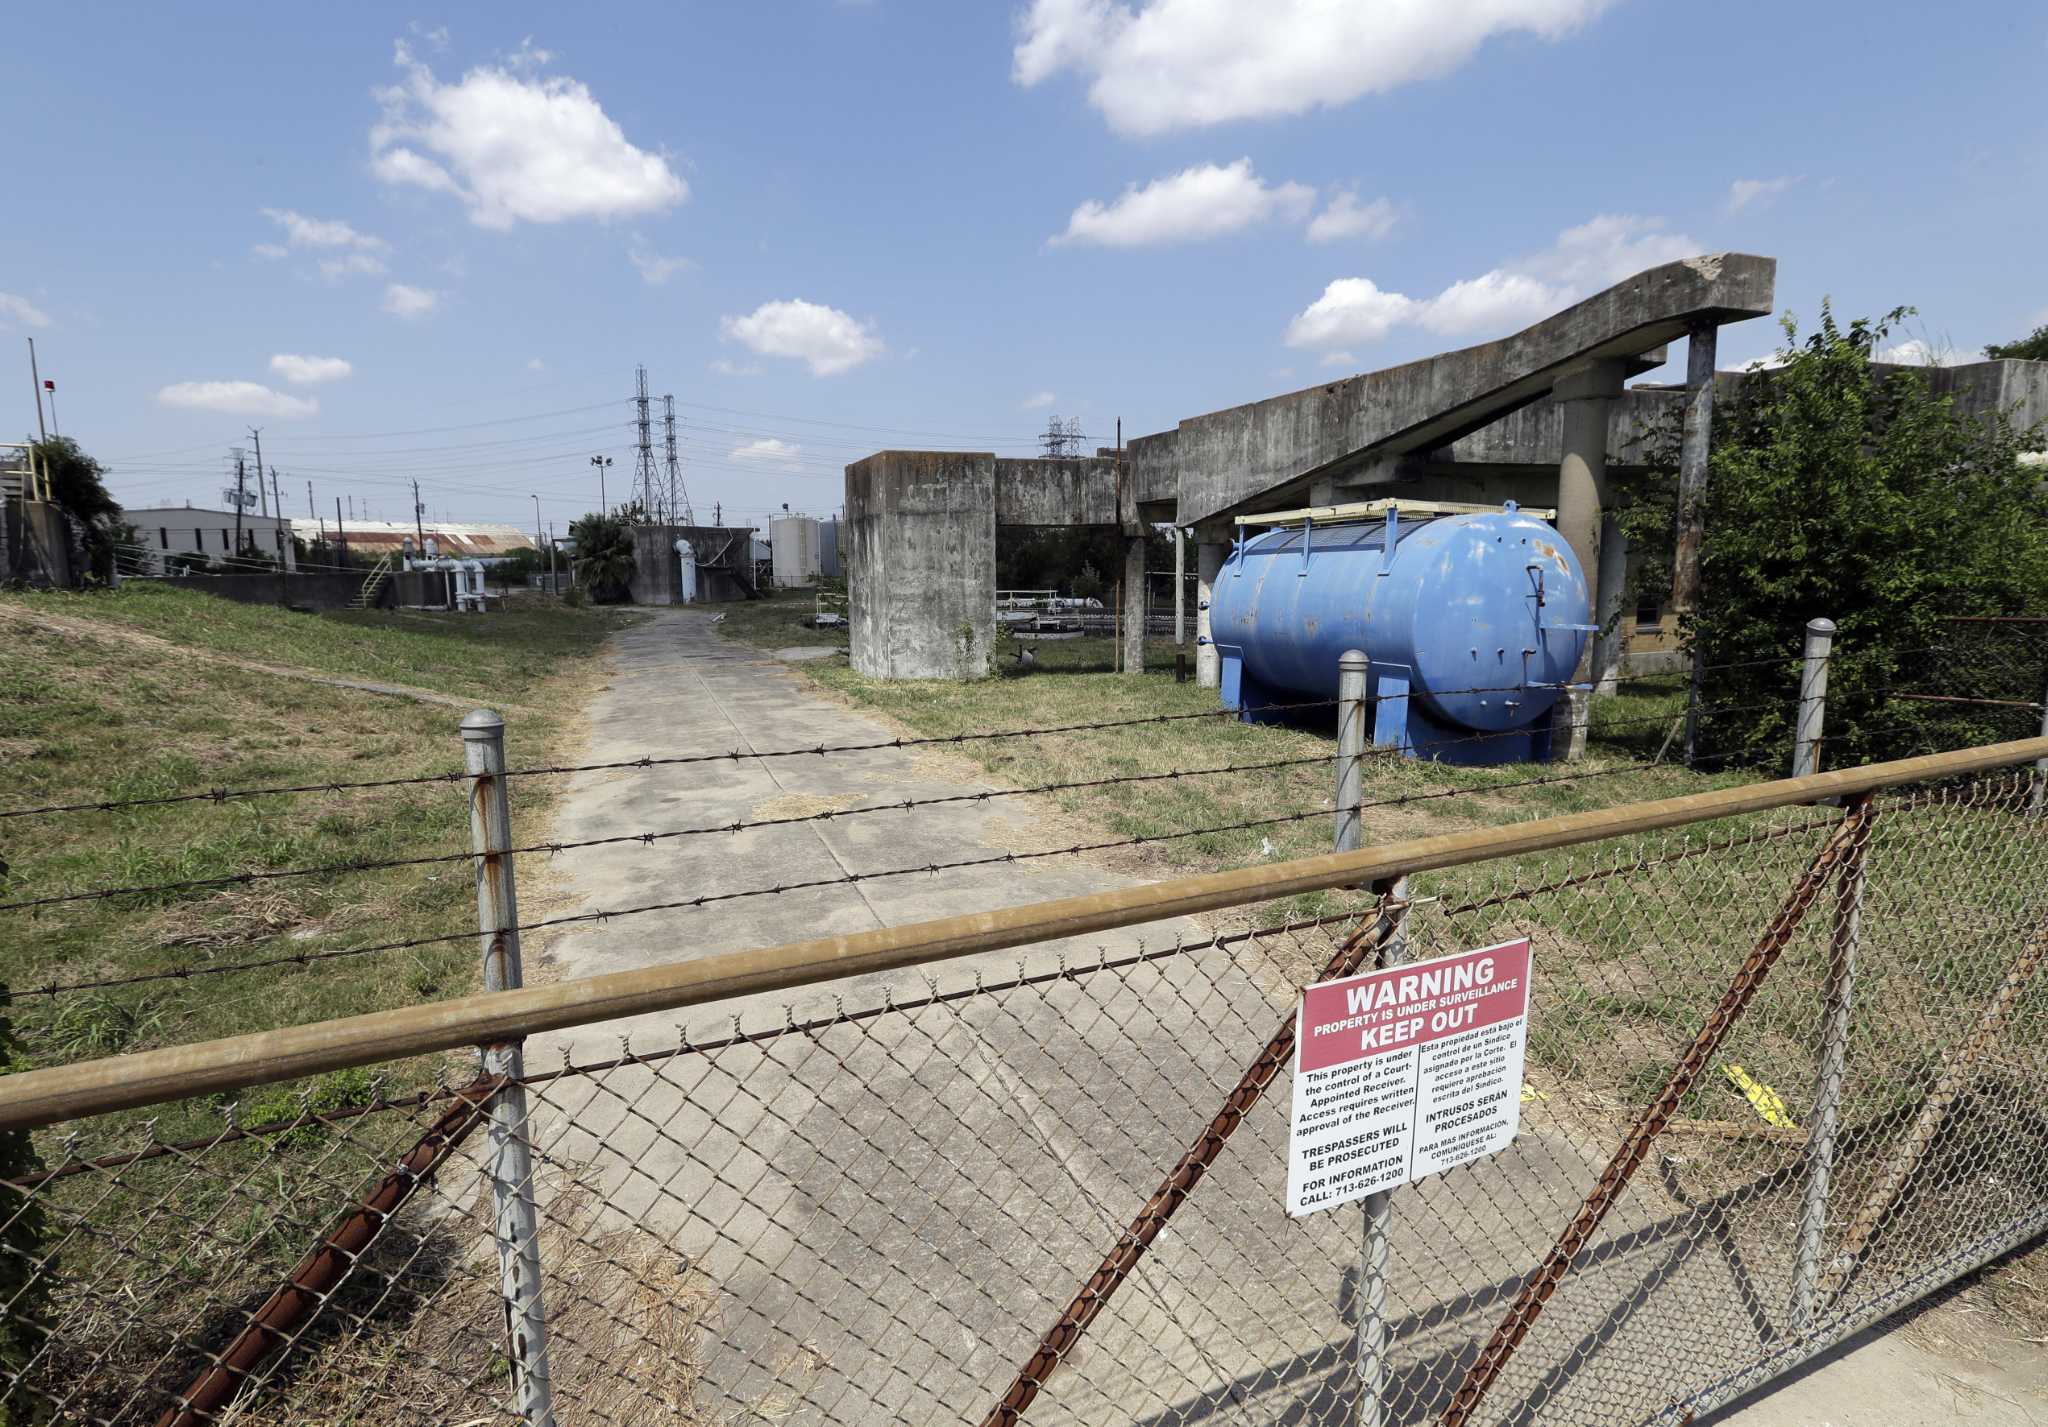 Global warming makes Superfund sites more dangerous [Editorial] - Houston Chronicle